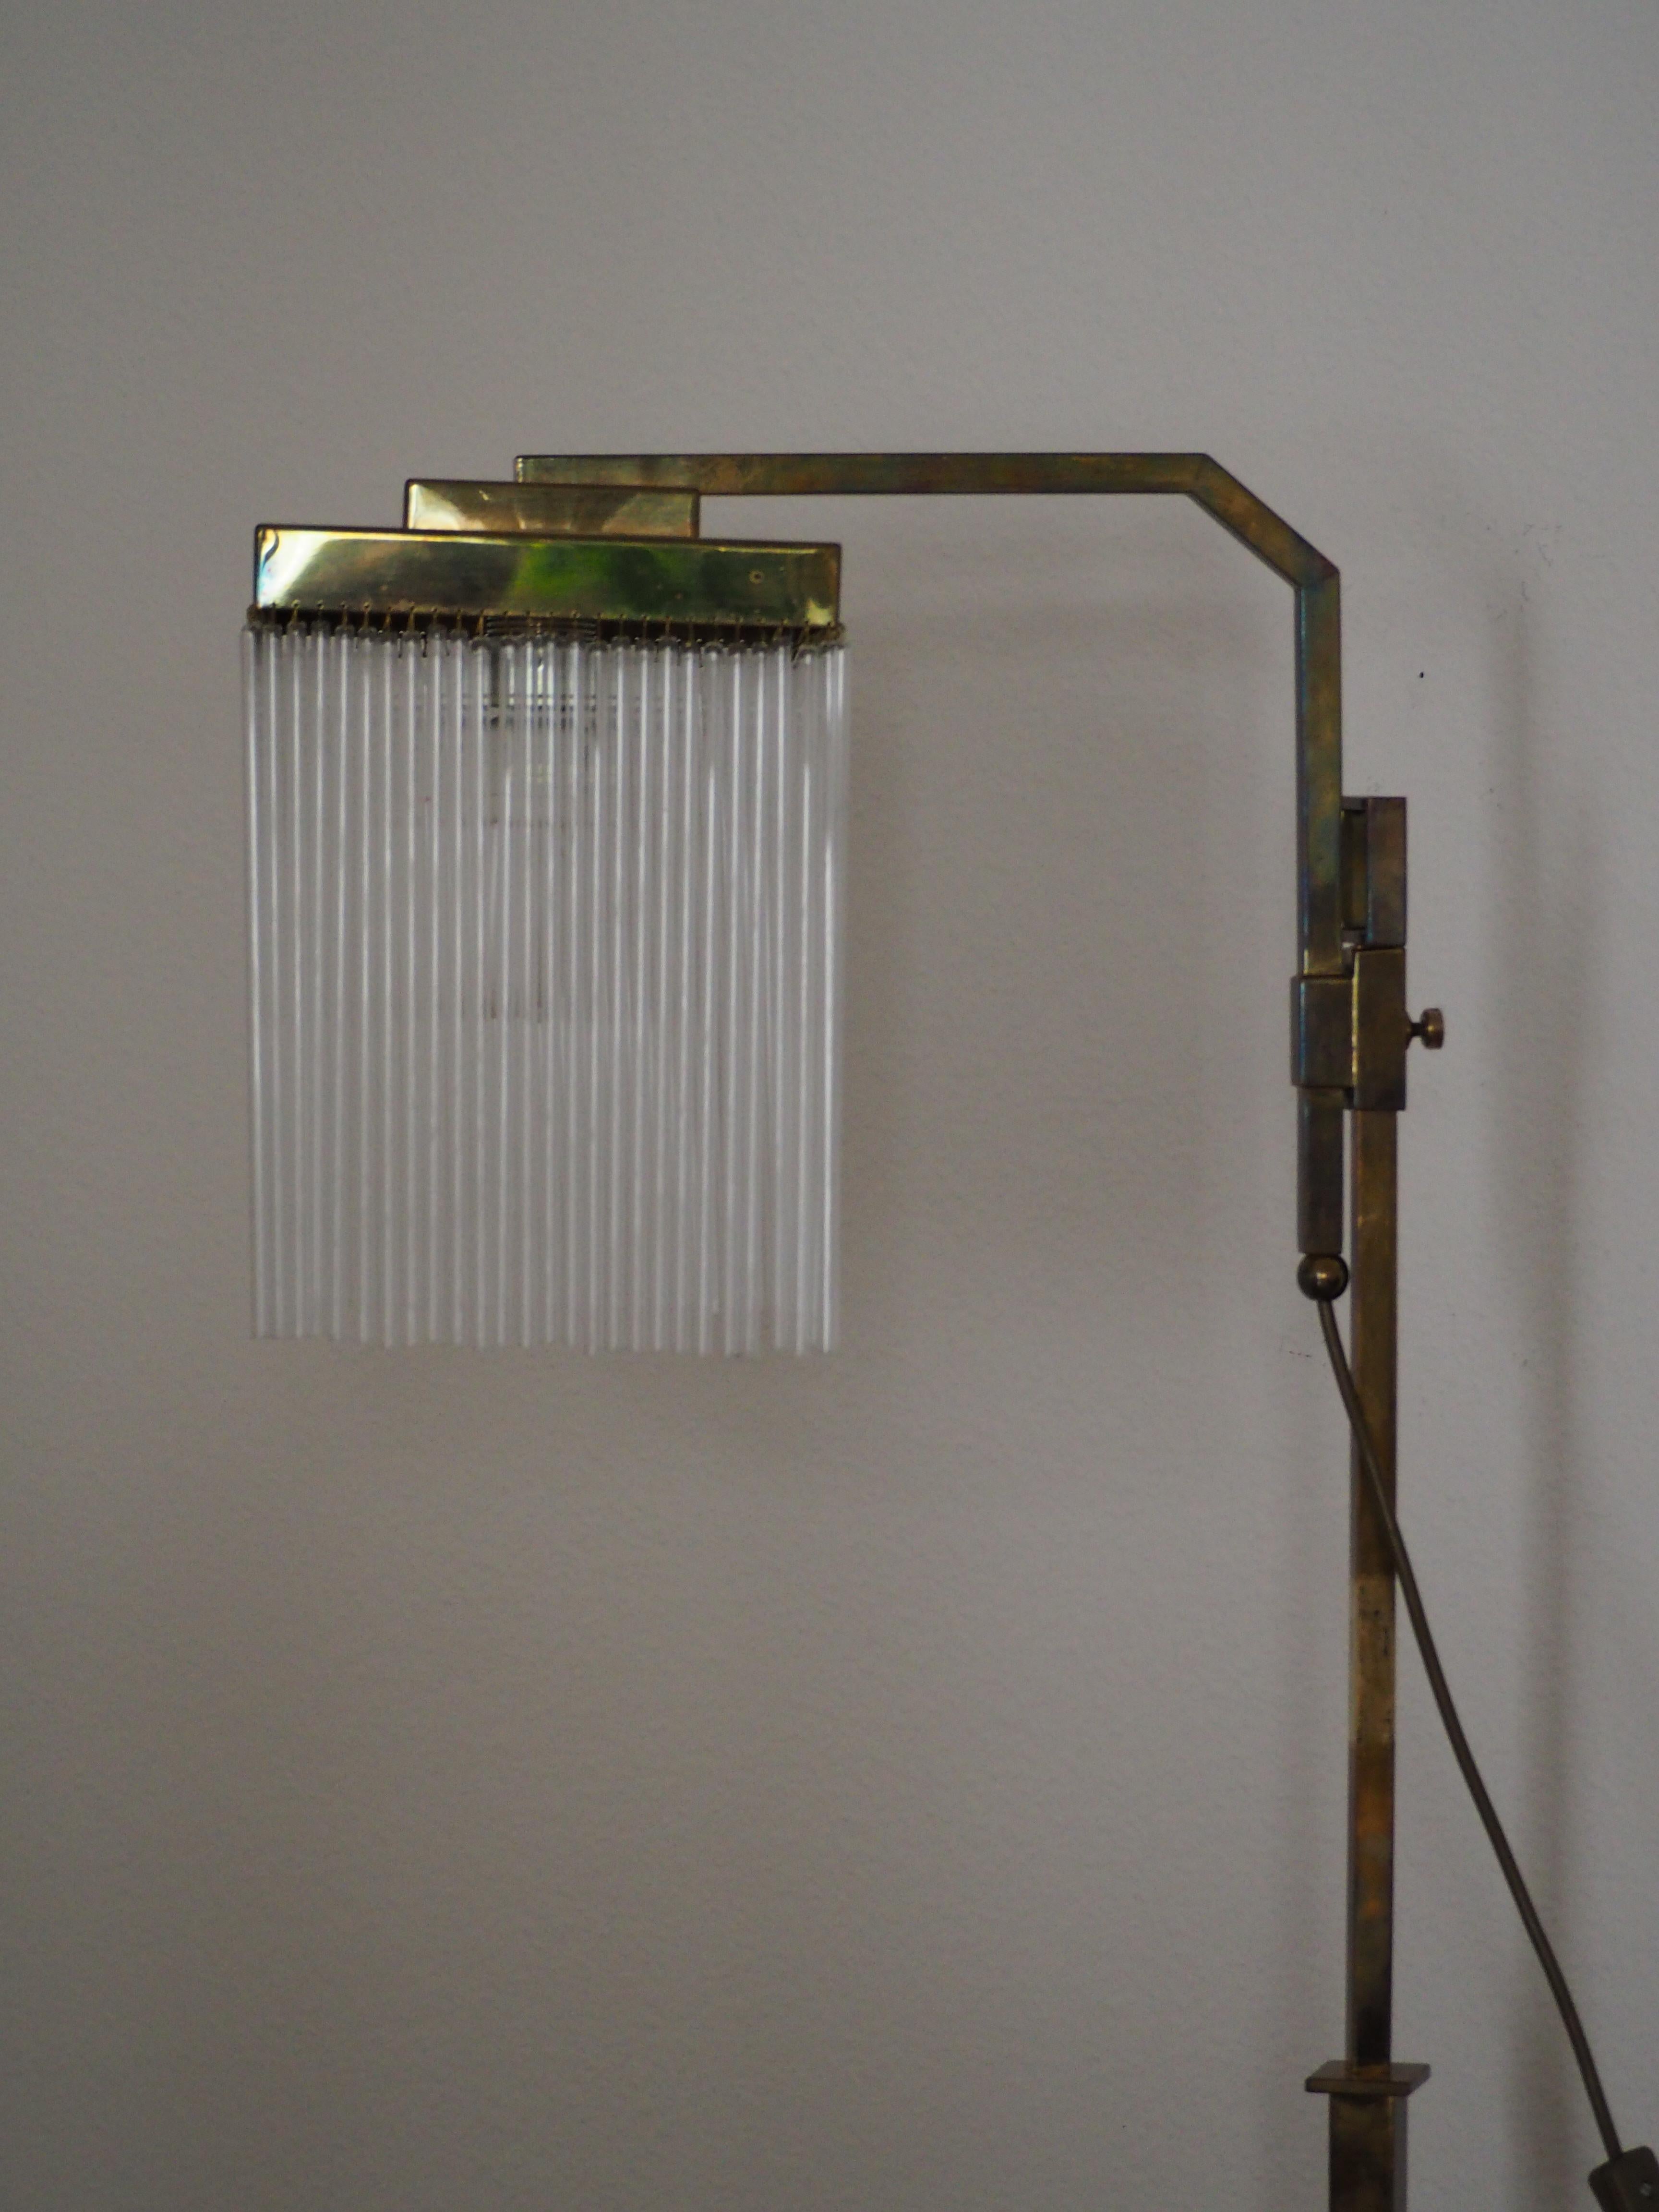 Rare Brass and Glass Floor Lamp From Vienna, Koloman Moser, Otto Wagner Style 1